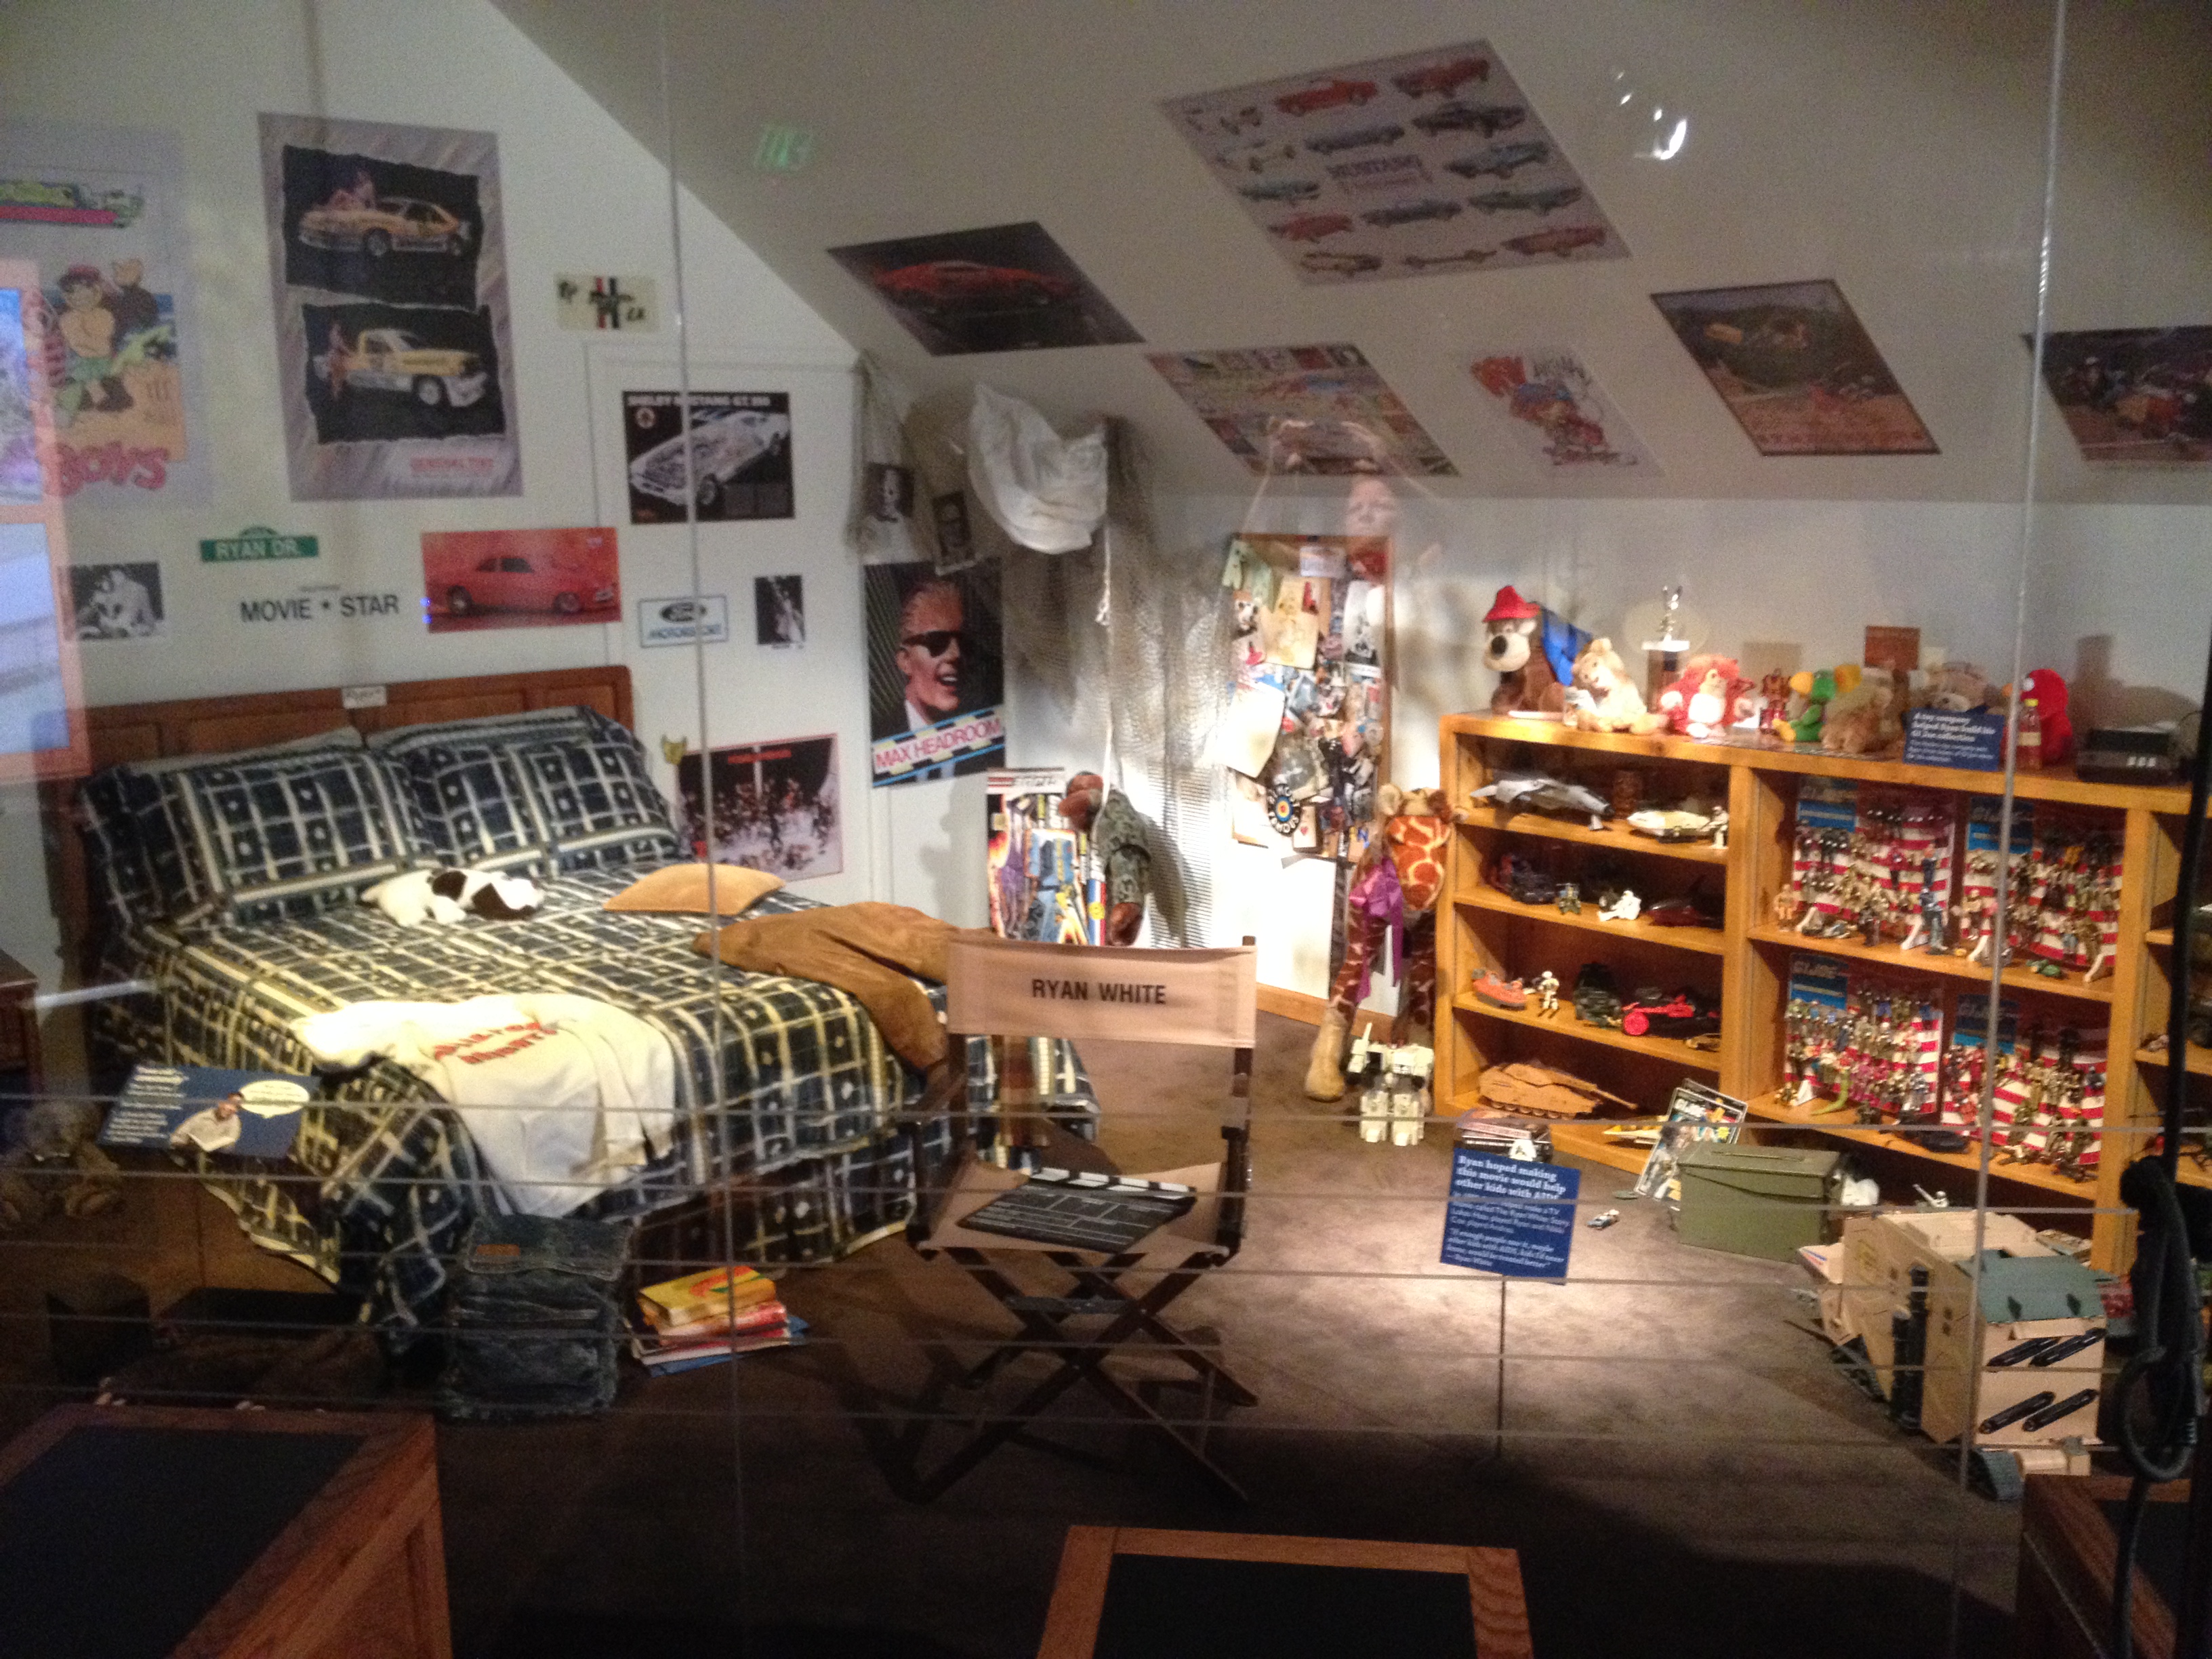 Ryan White's room in The Power of Children at The Children's Museum of Indianapolis